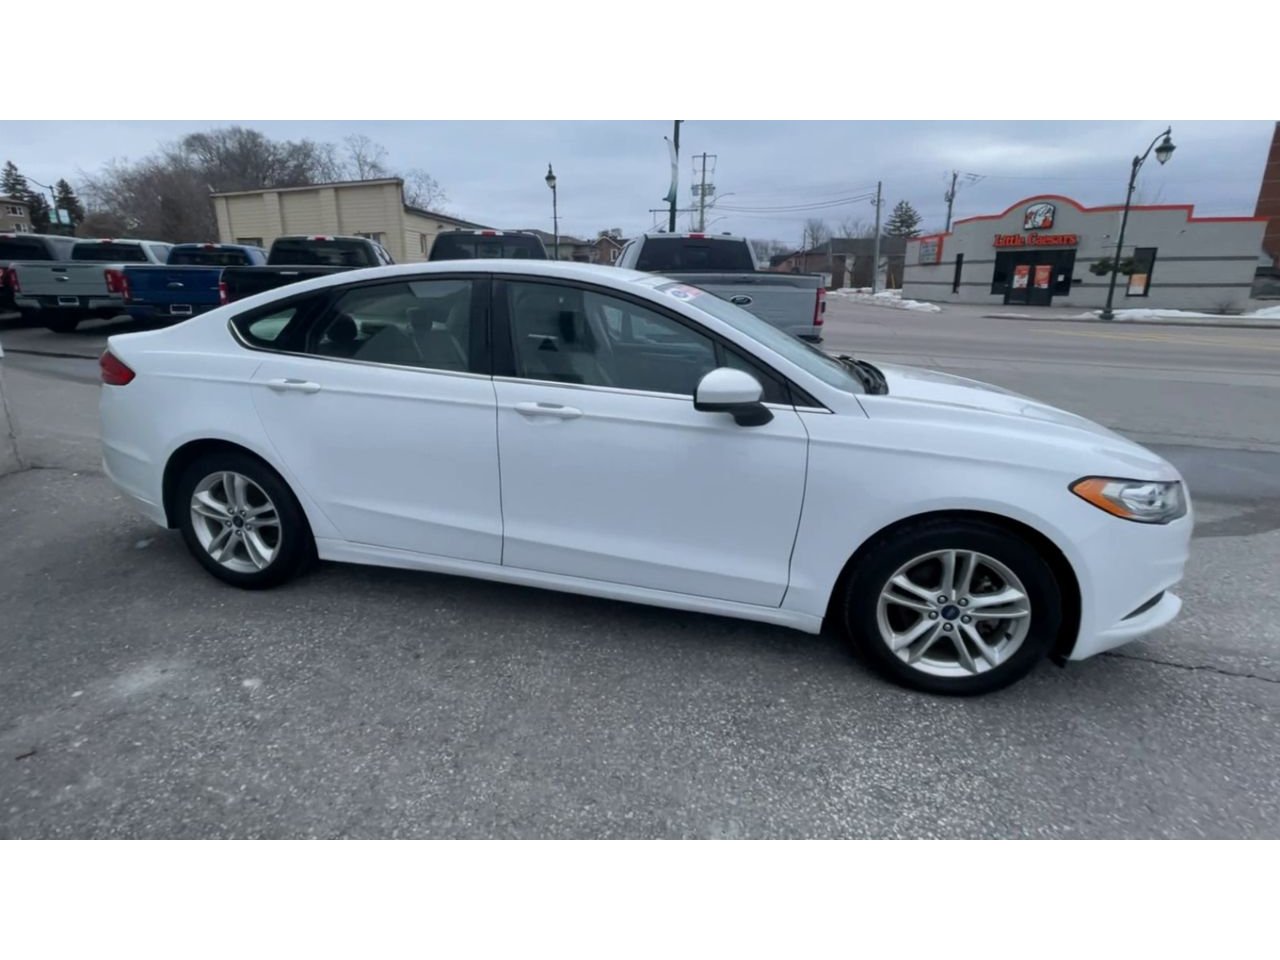 2018 Ford Fusion - P21087 Full Image 2